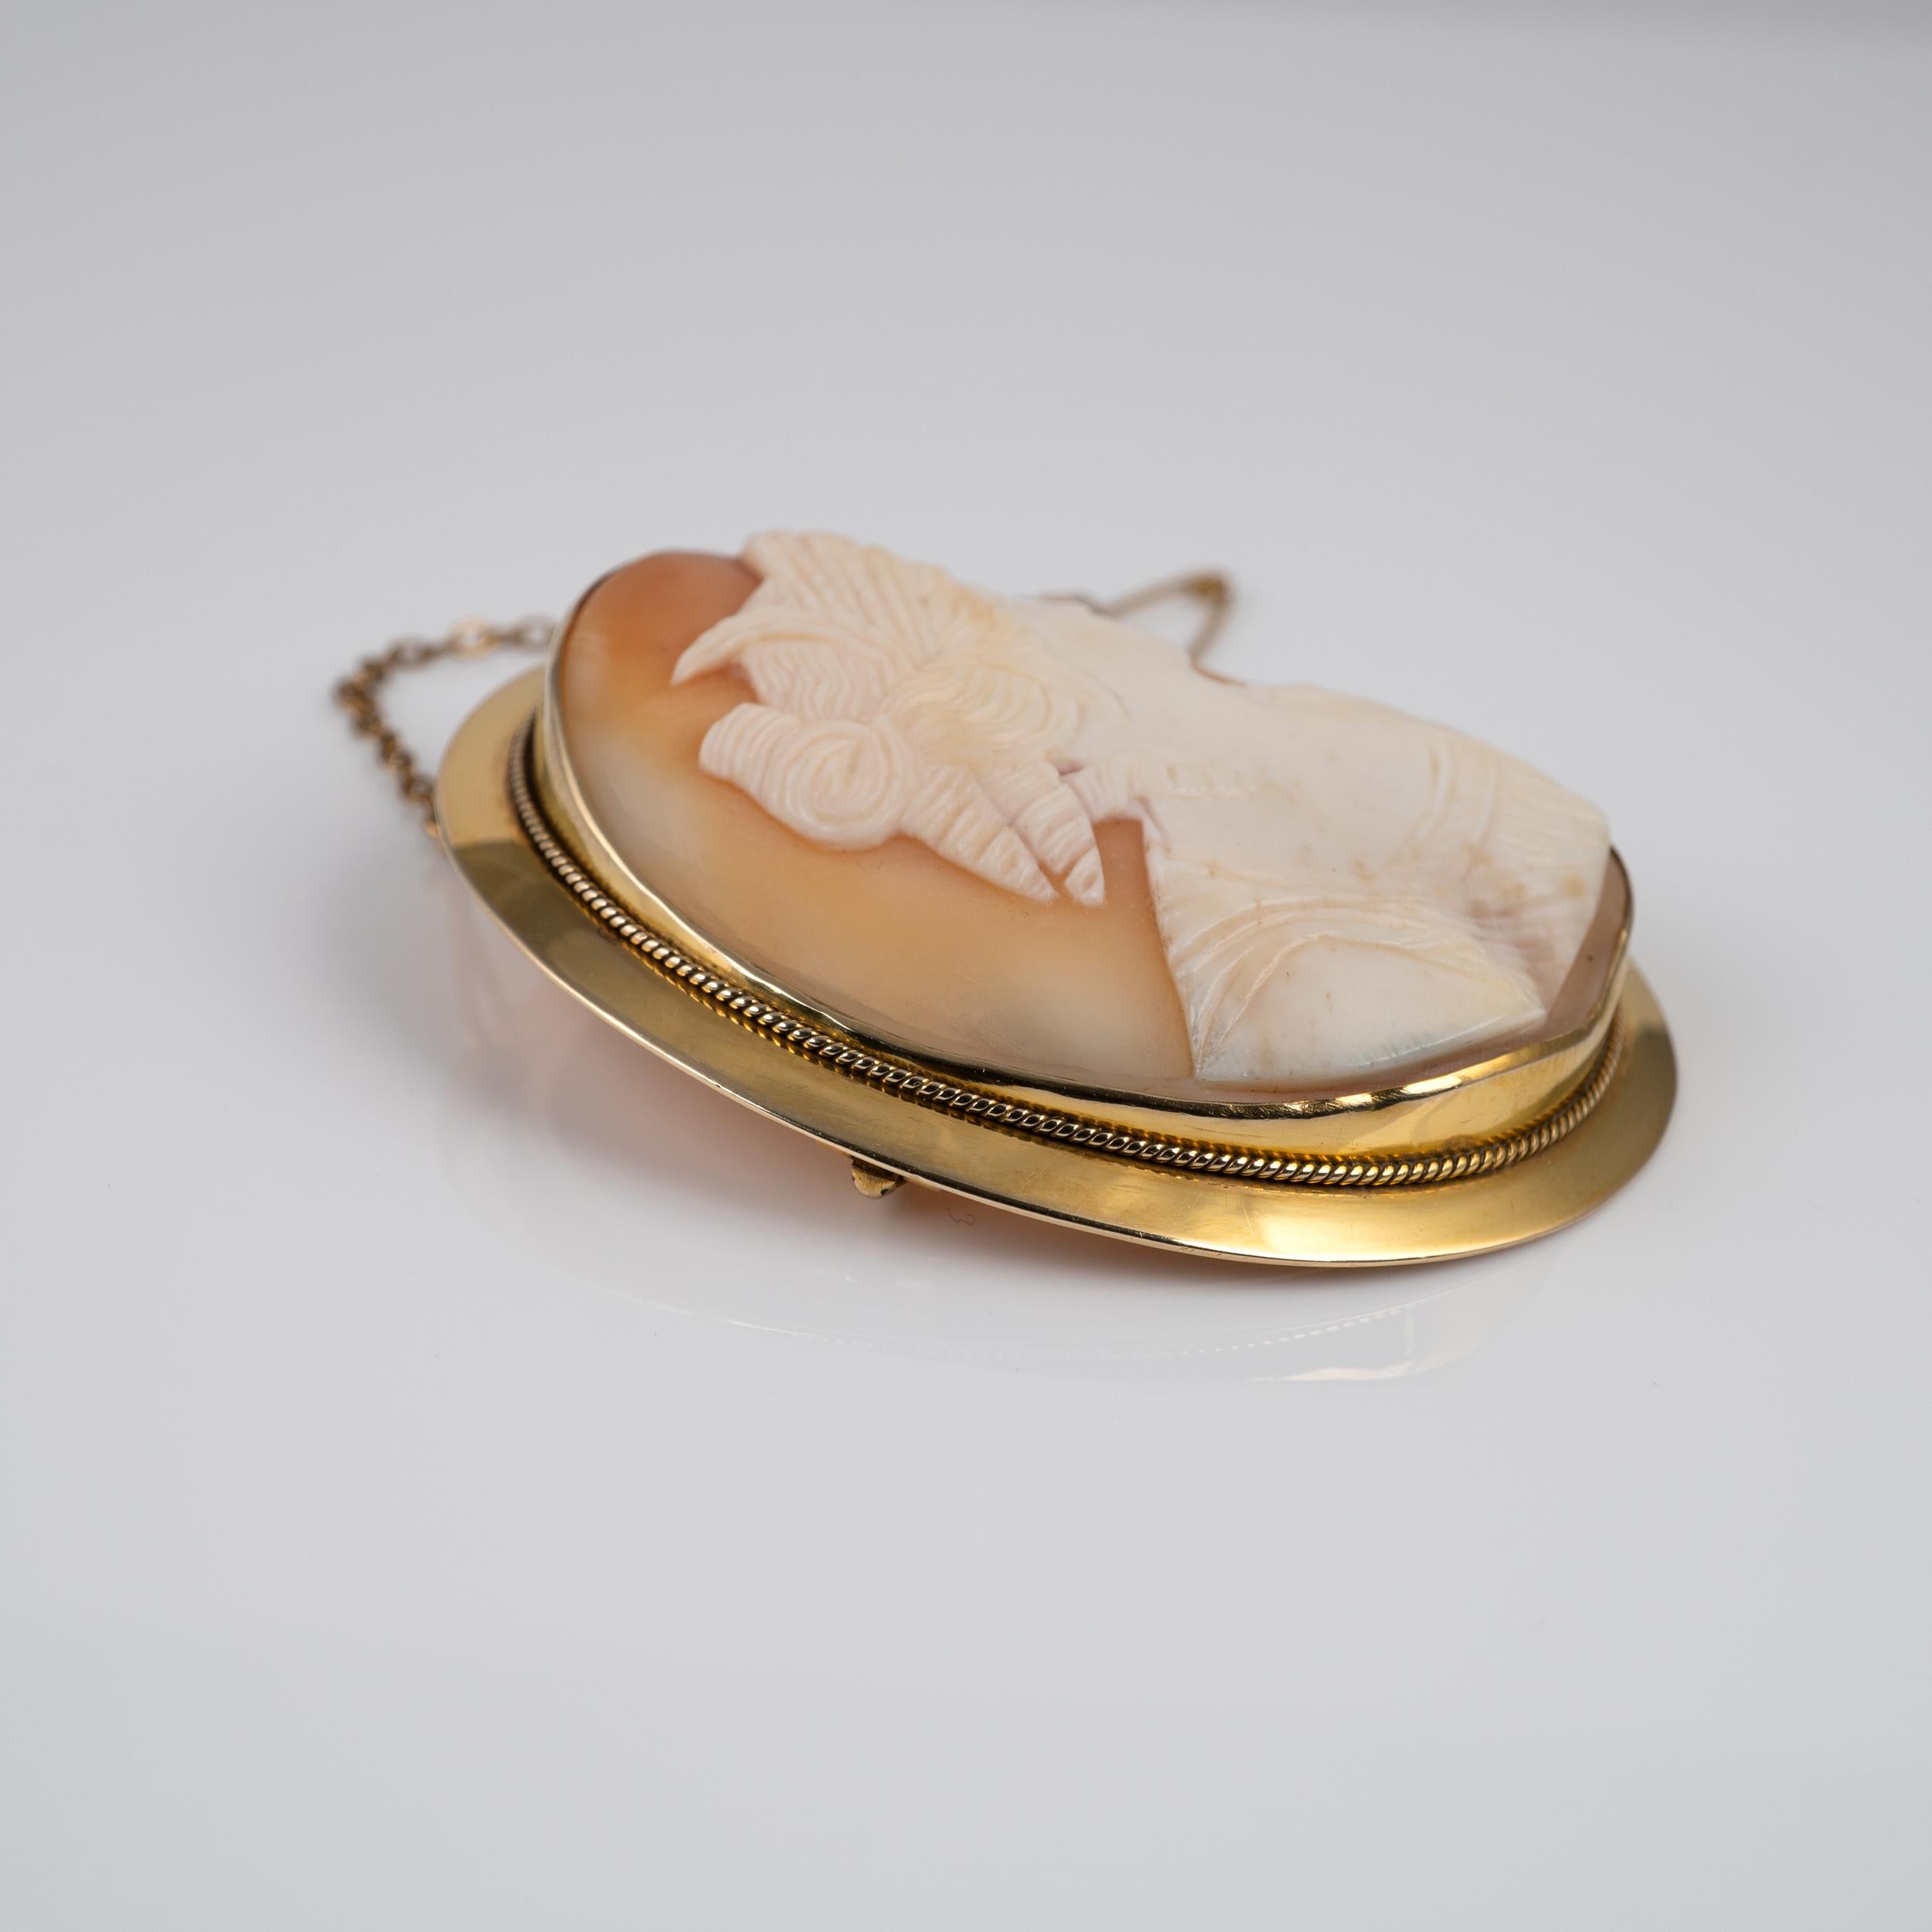 Victorian Vintage Carnelian Shell Cameo Brooch, Oval Gold Mount, circa 1960s